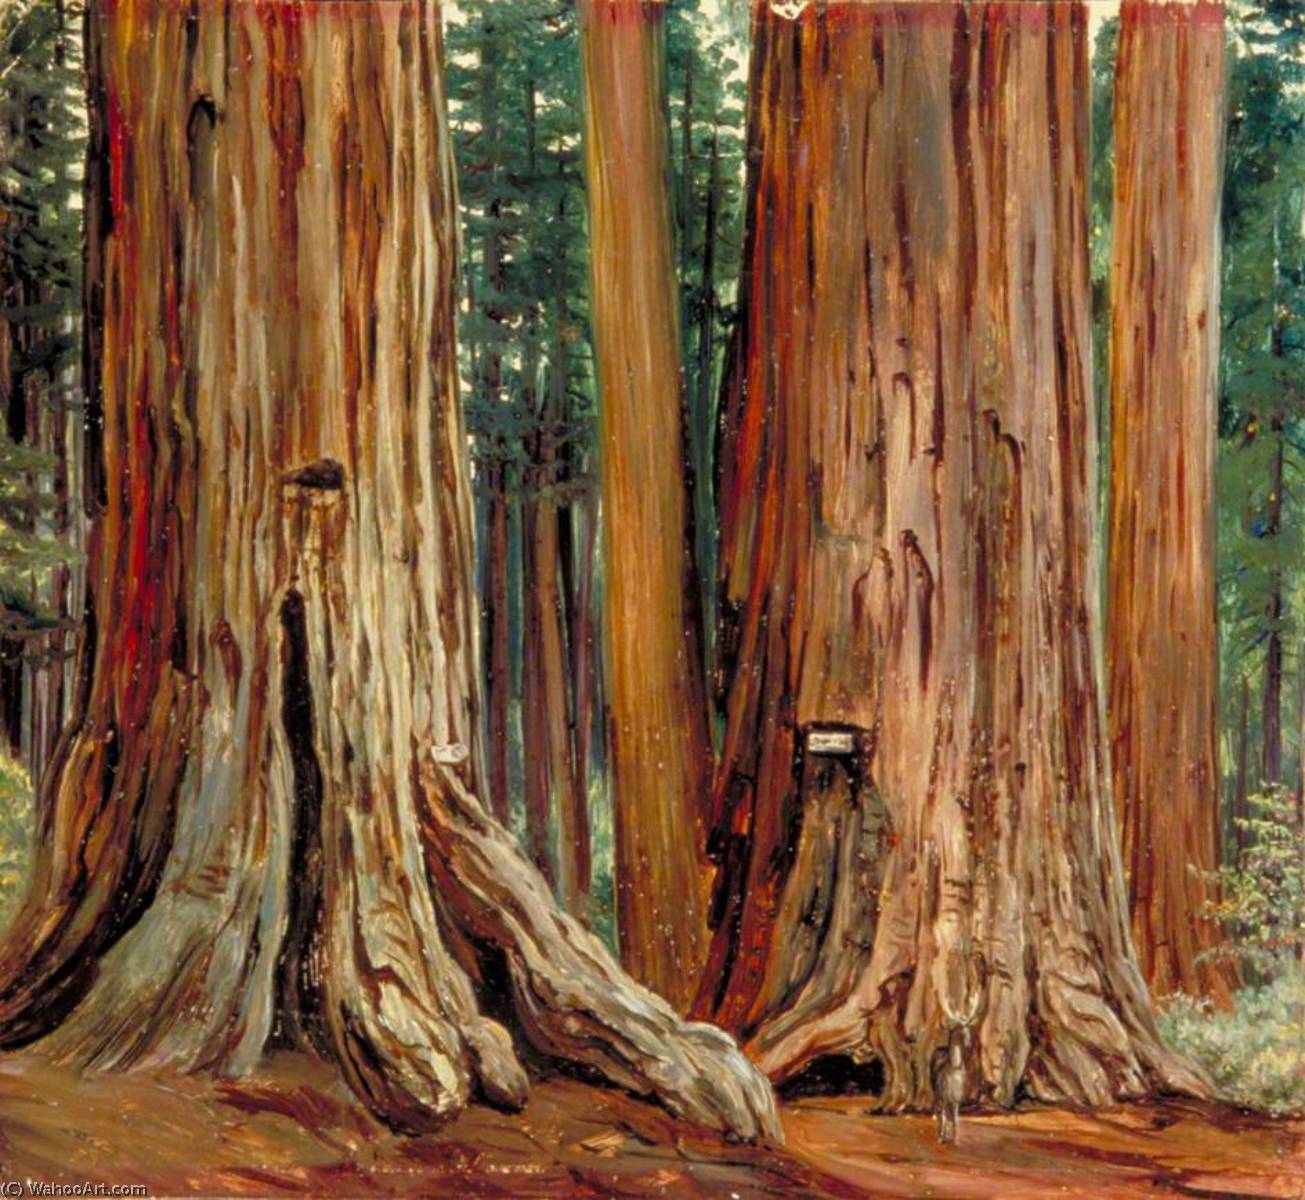 WikiOO.org - 백과 사전 - 회화, 삽화 Marianne North - 'Castor and Pollux' in the Calaveras Grove of Big Trees, California